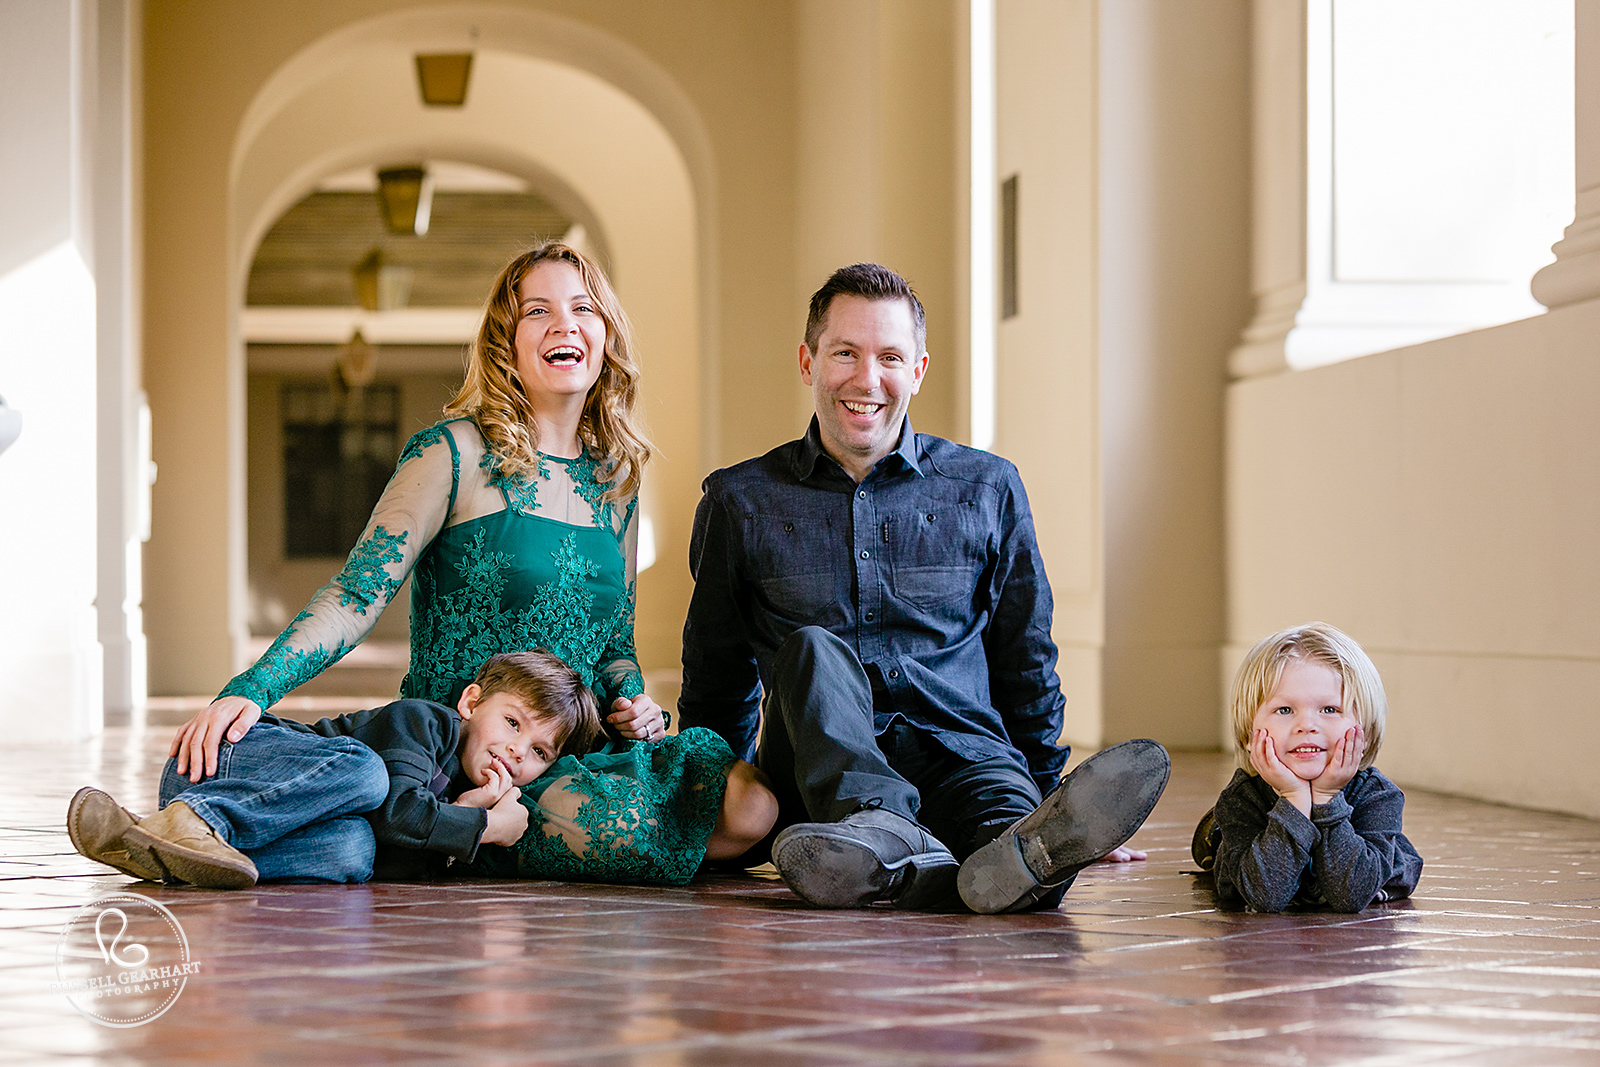 Pasadena City Hall Family Portraits: Hayes Family - Russell Gearhart Photography - www.gearhartphoto.com